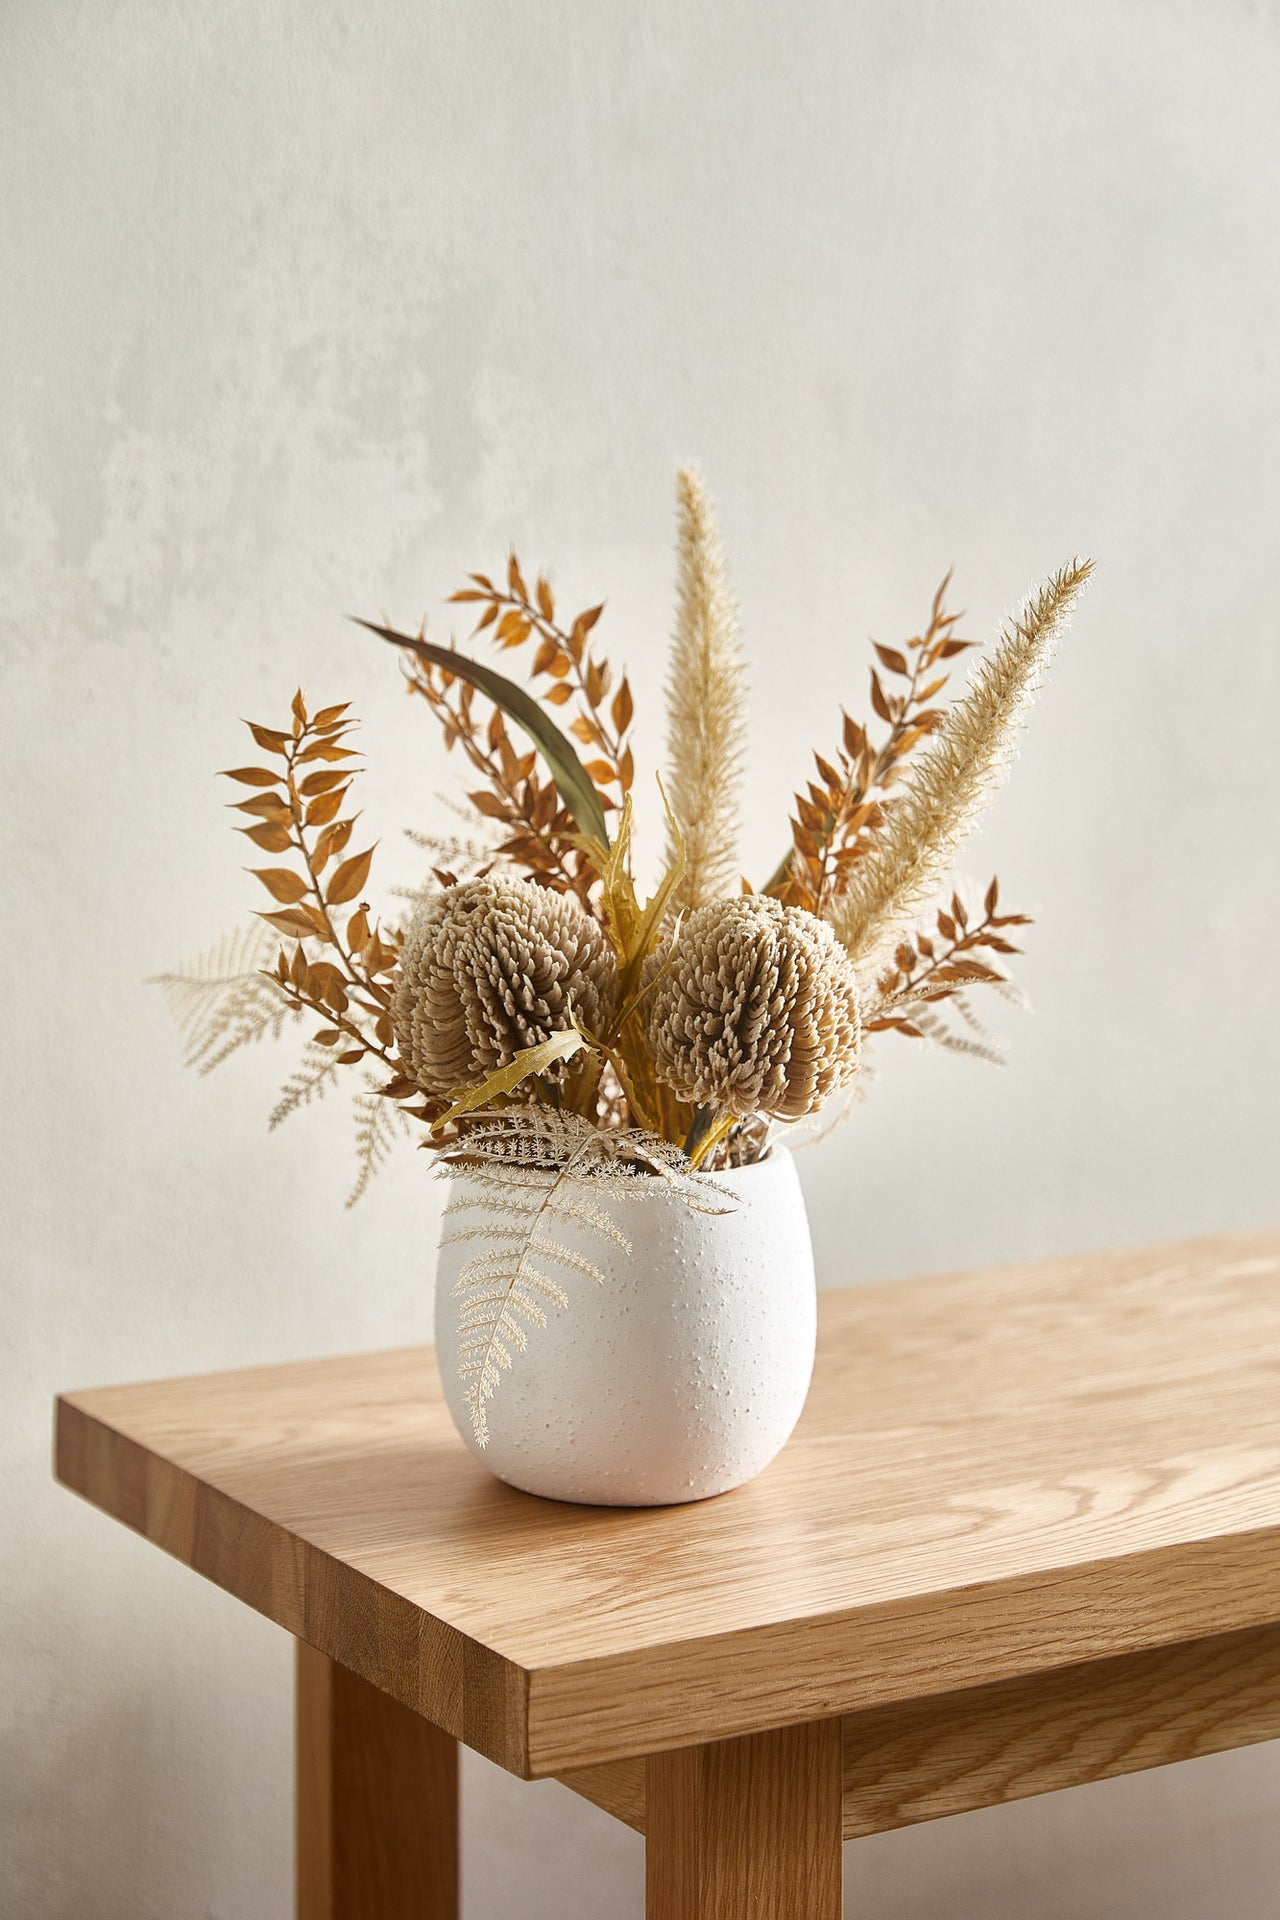 37cm Potted Faux Dried Look Mixed Banksia Arrangement